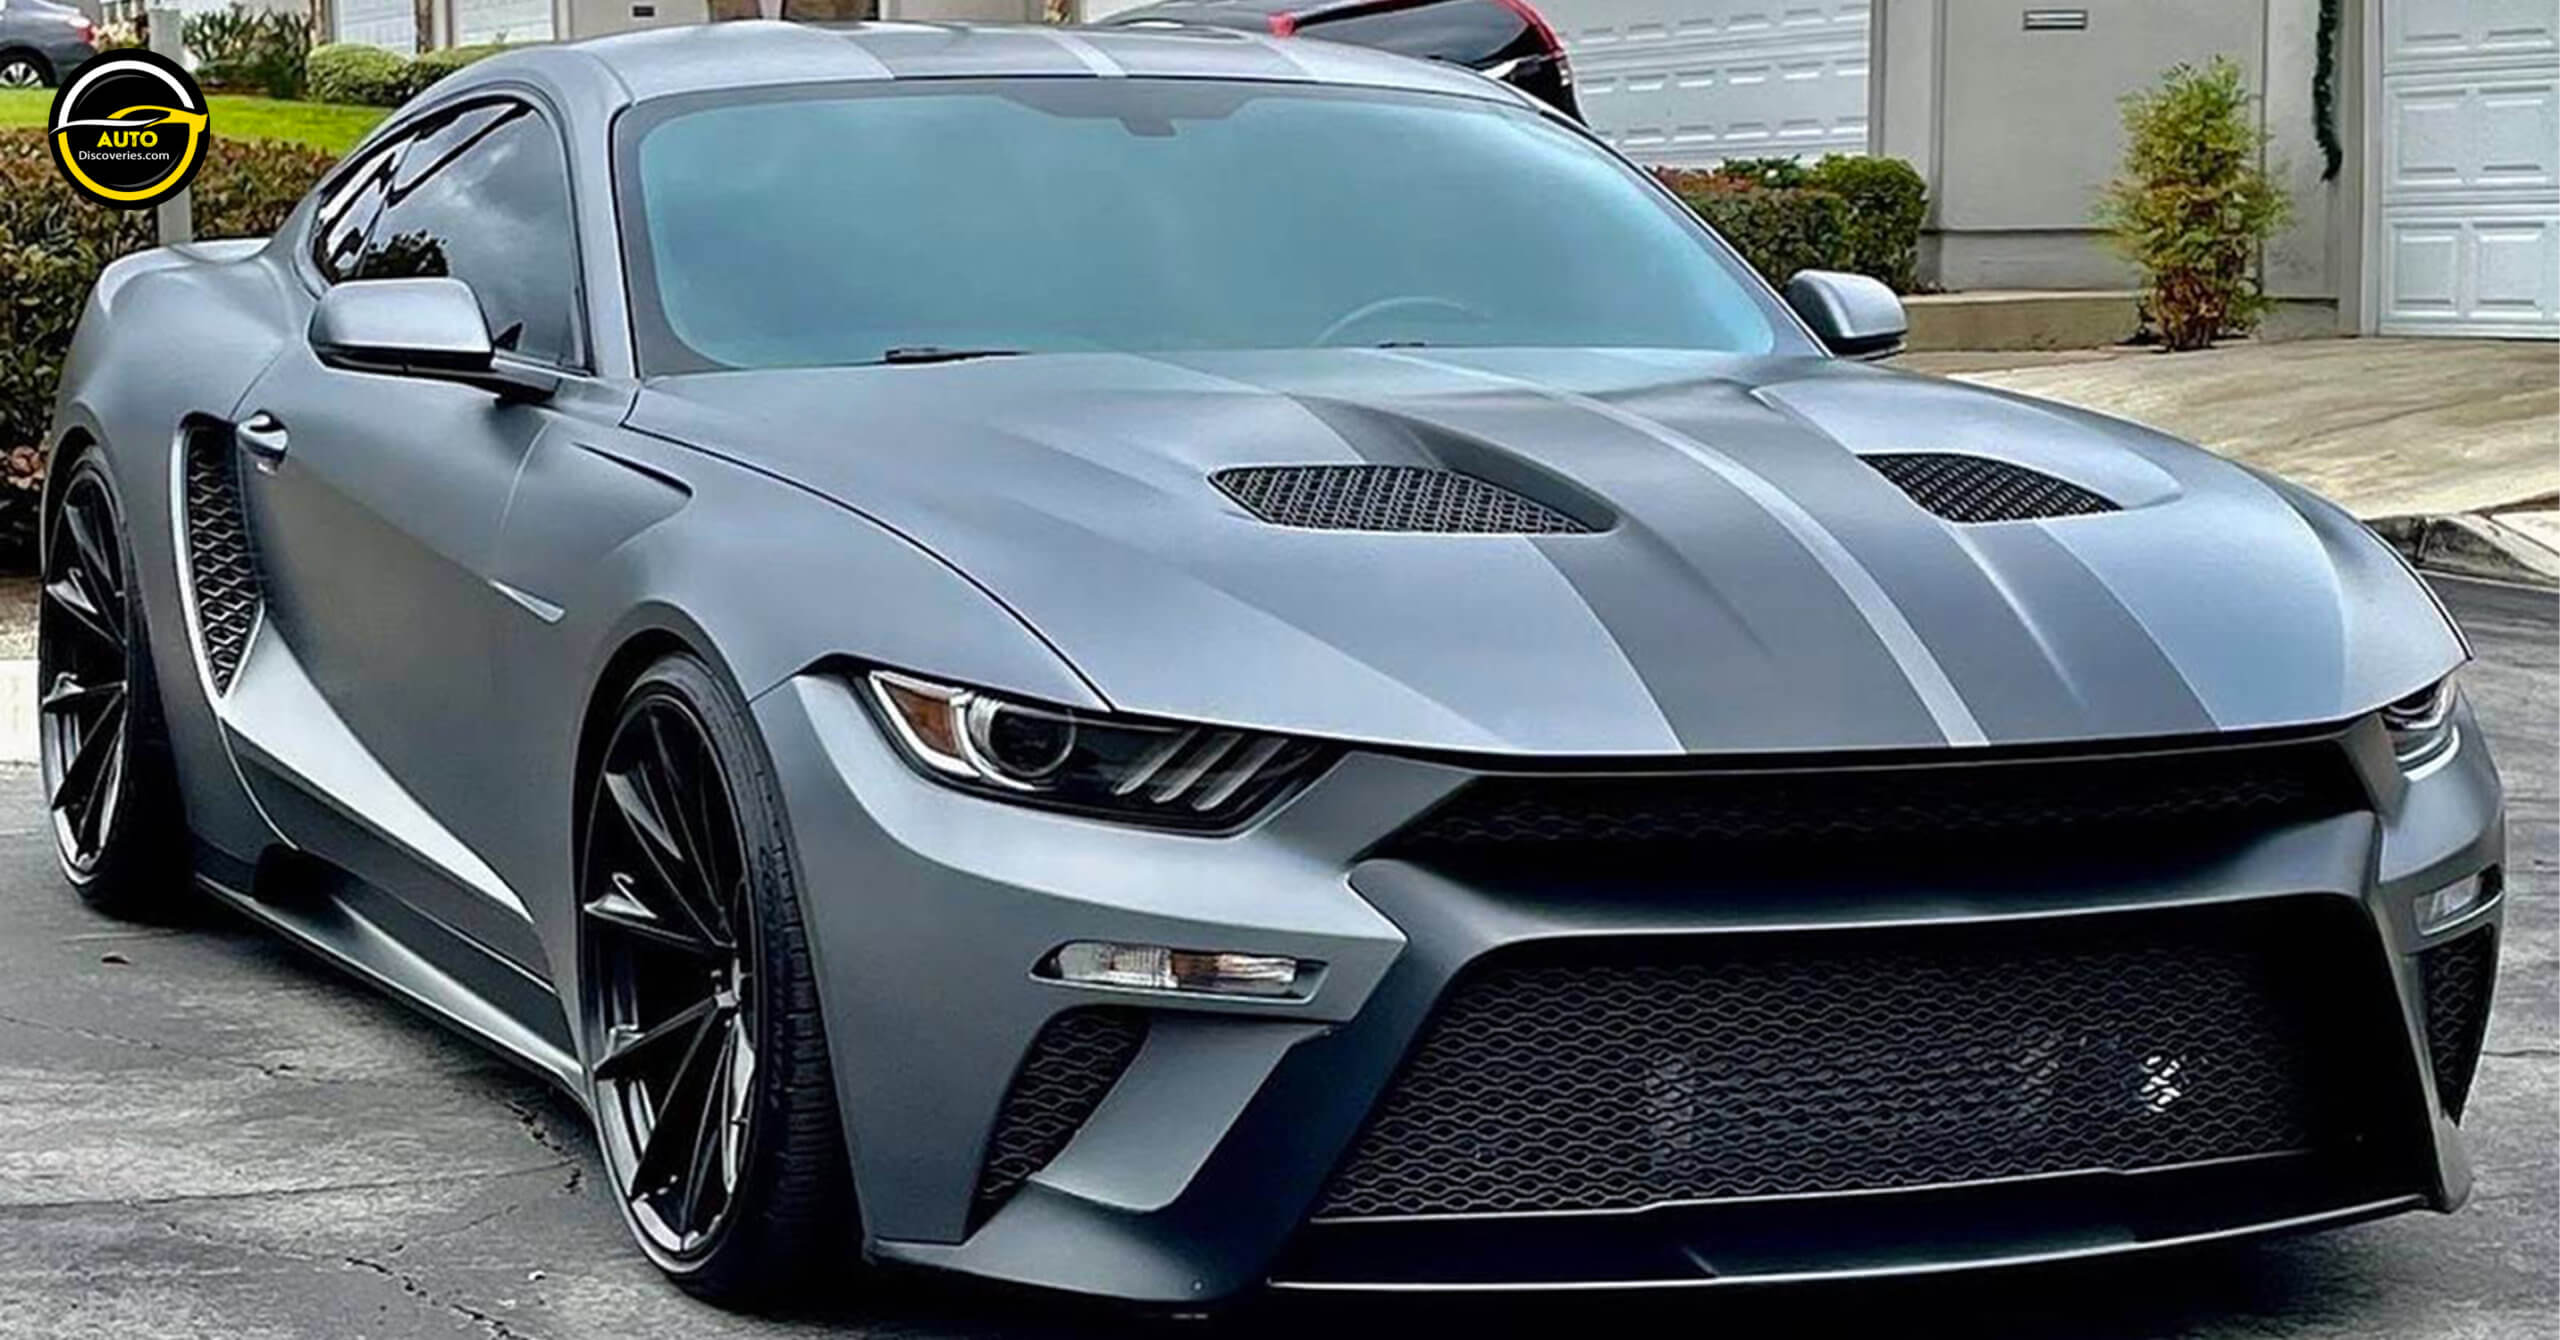 Meet The New Ford Mustang 2023!